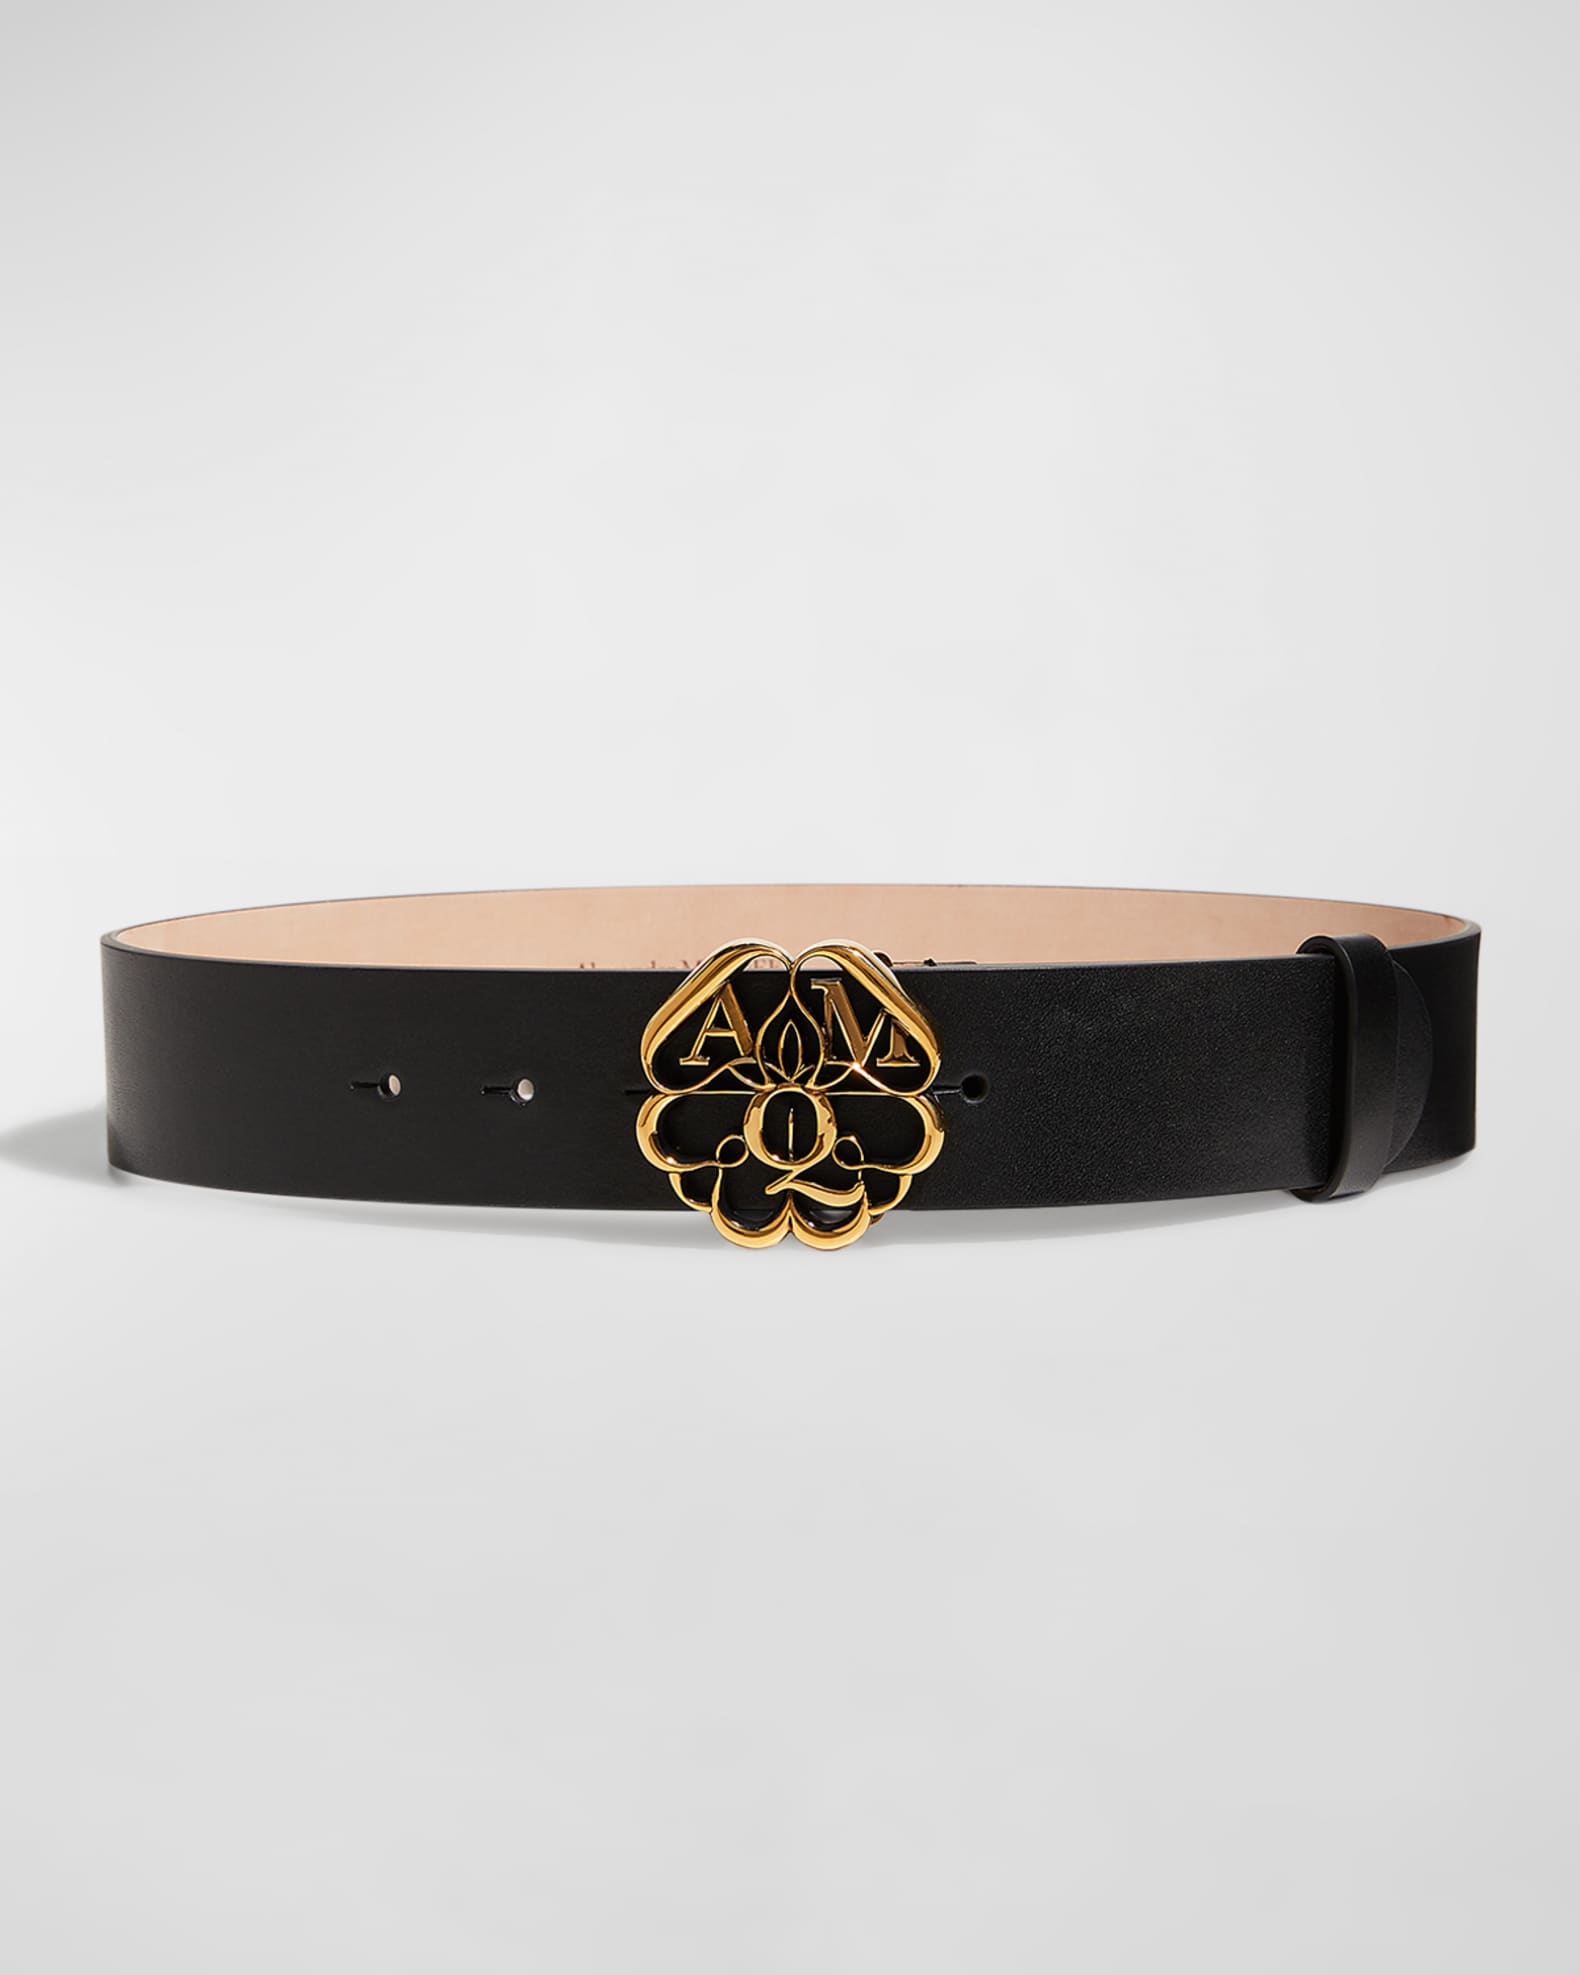 The Gucci Belt Is an Enduring Fashion Statement